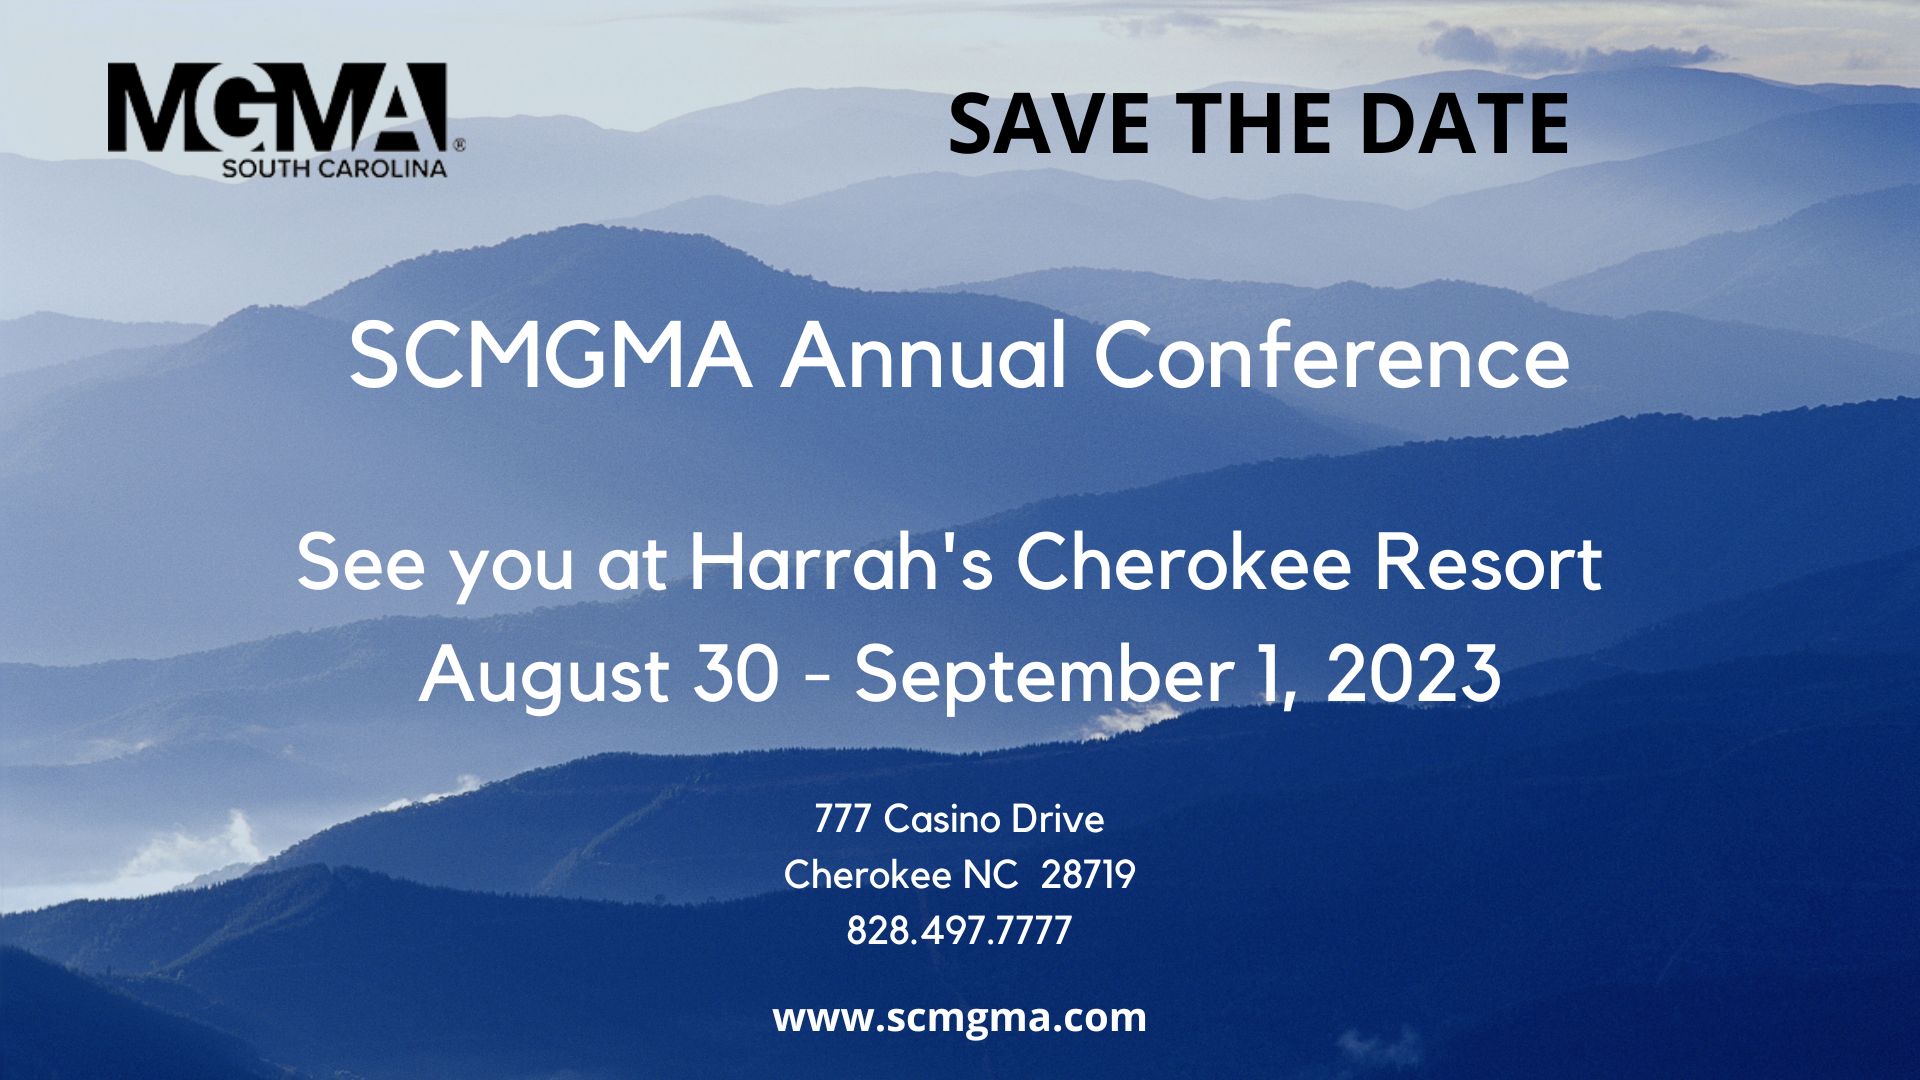 Save The Date SCMGMA 2023 Conference